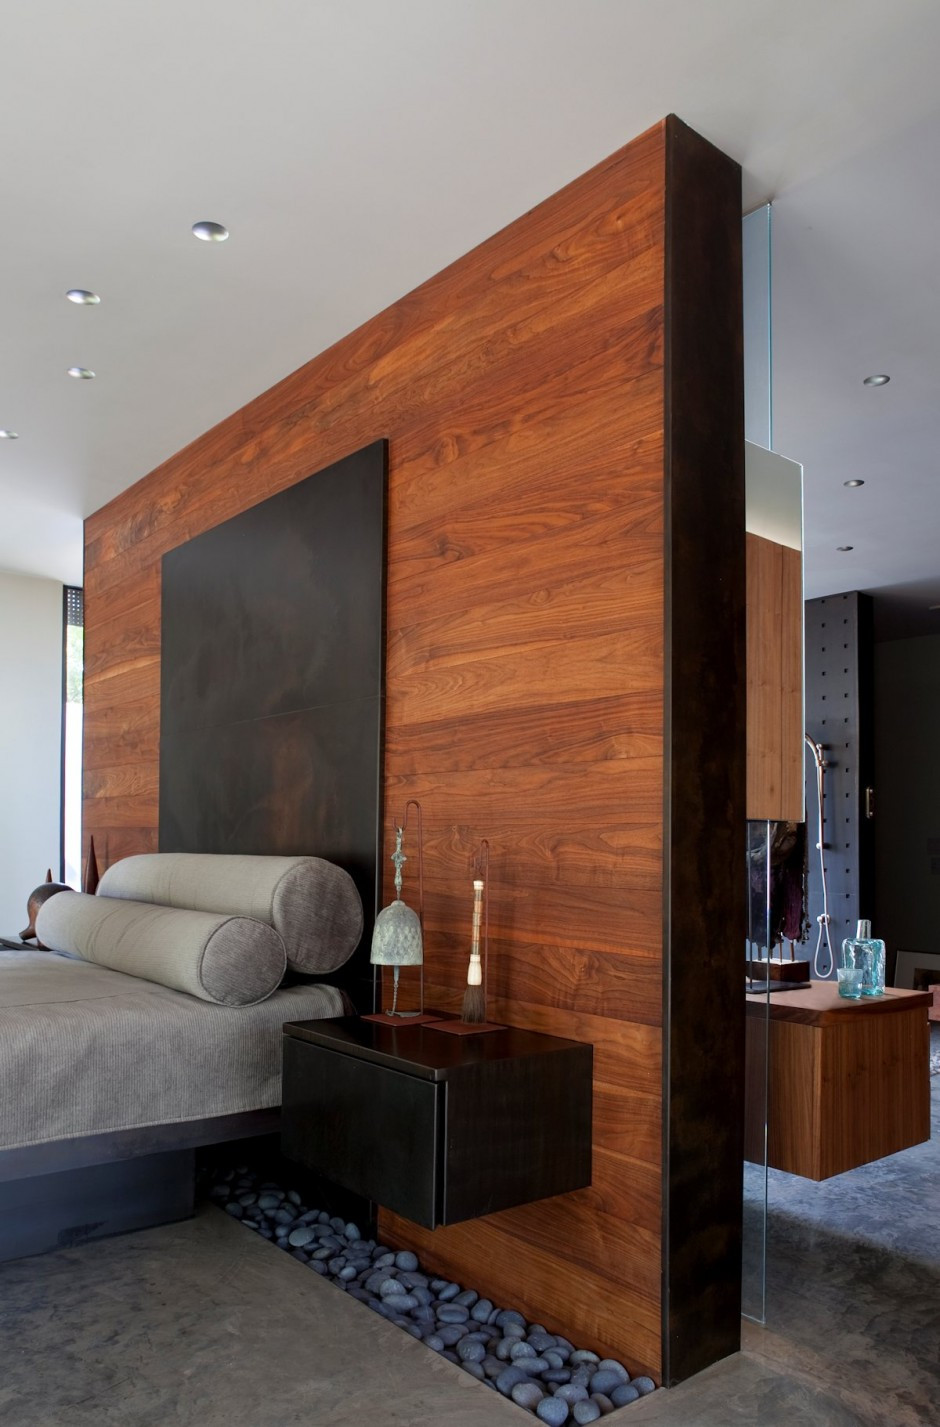 Wooden Accent Wall Bedroom
 52 Master Bedroom Ideas That Go Beyond The Basics